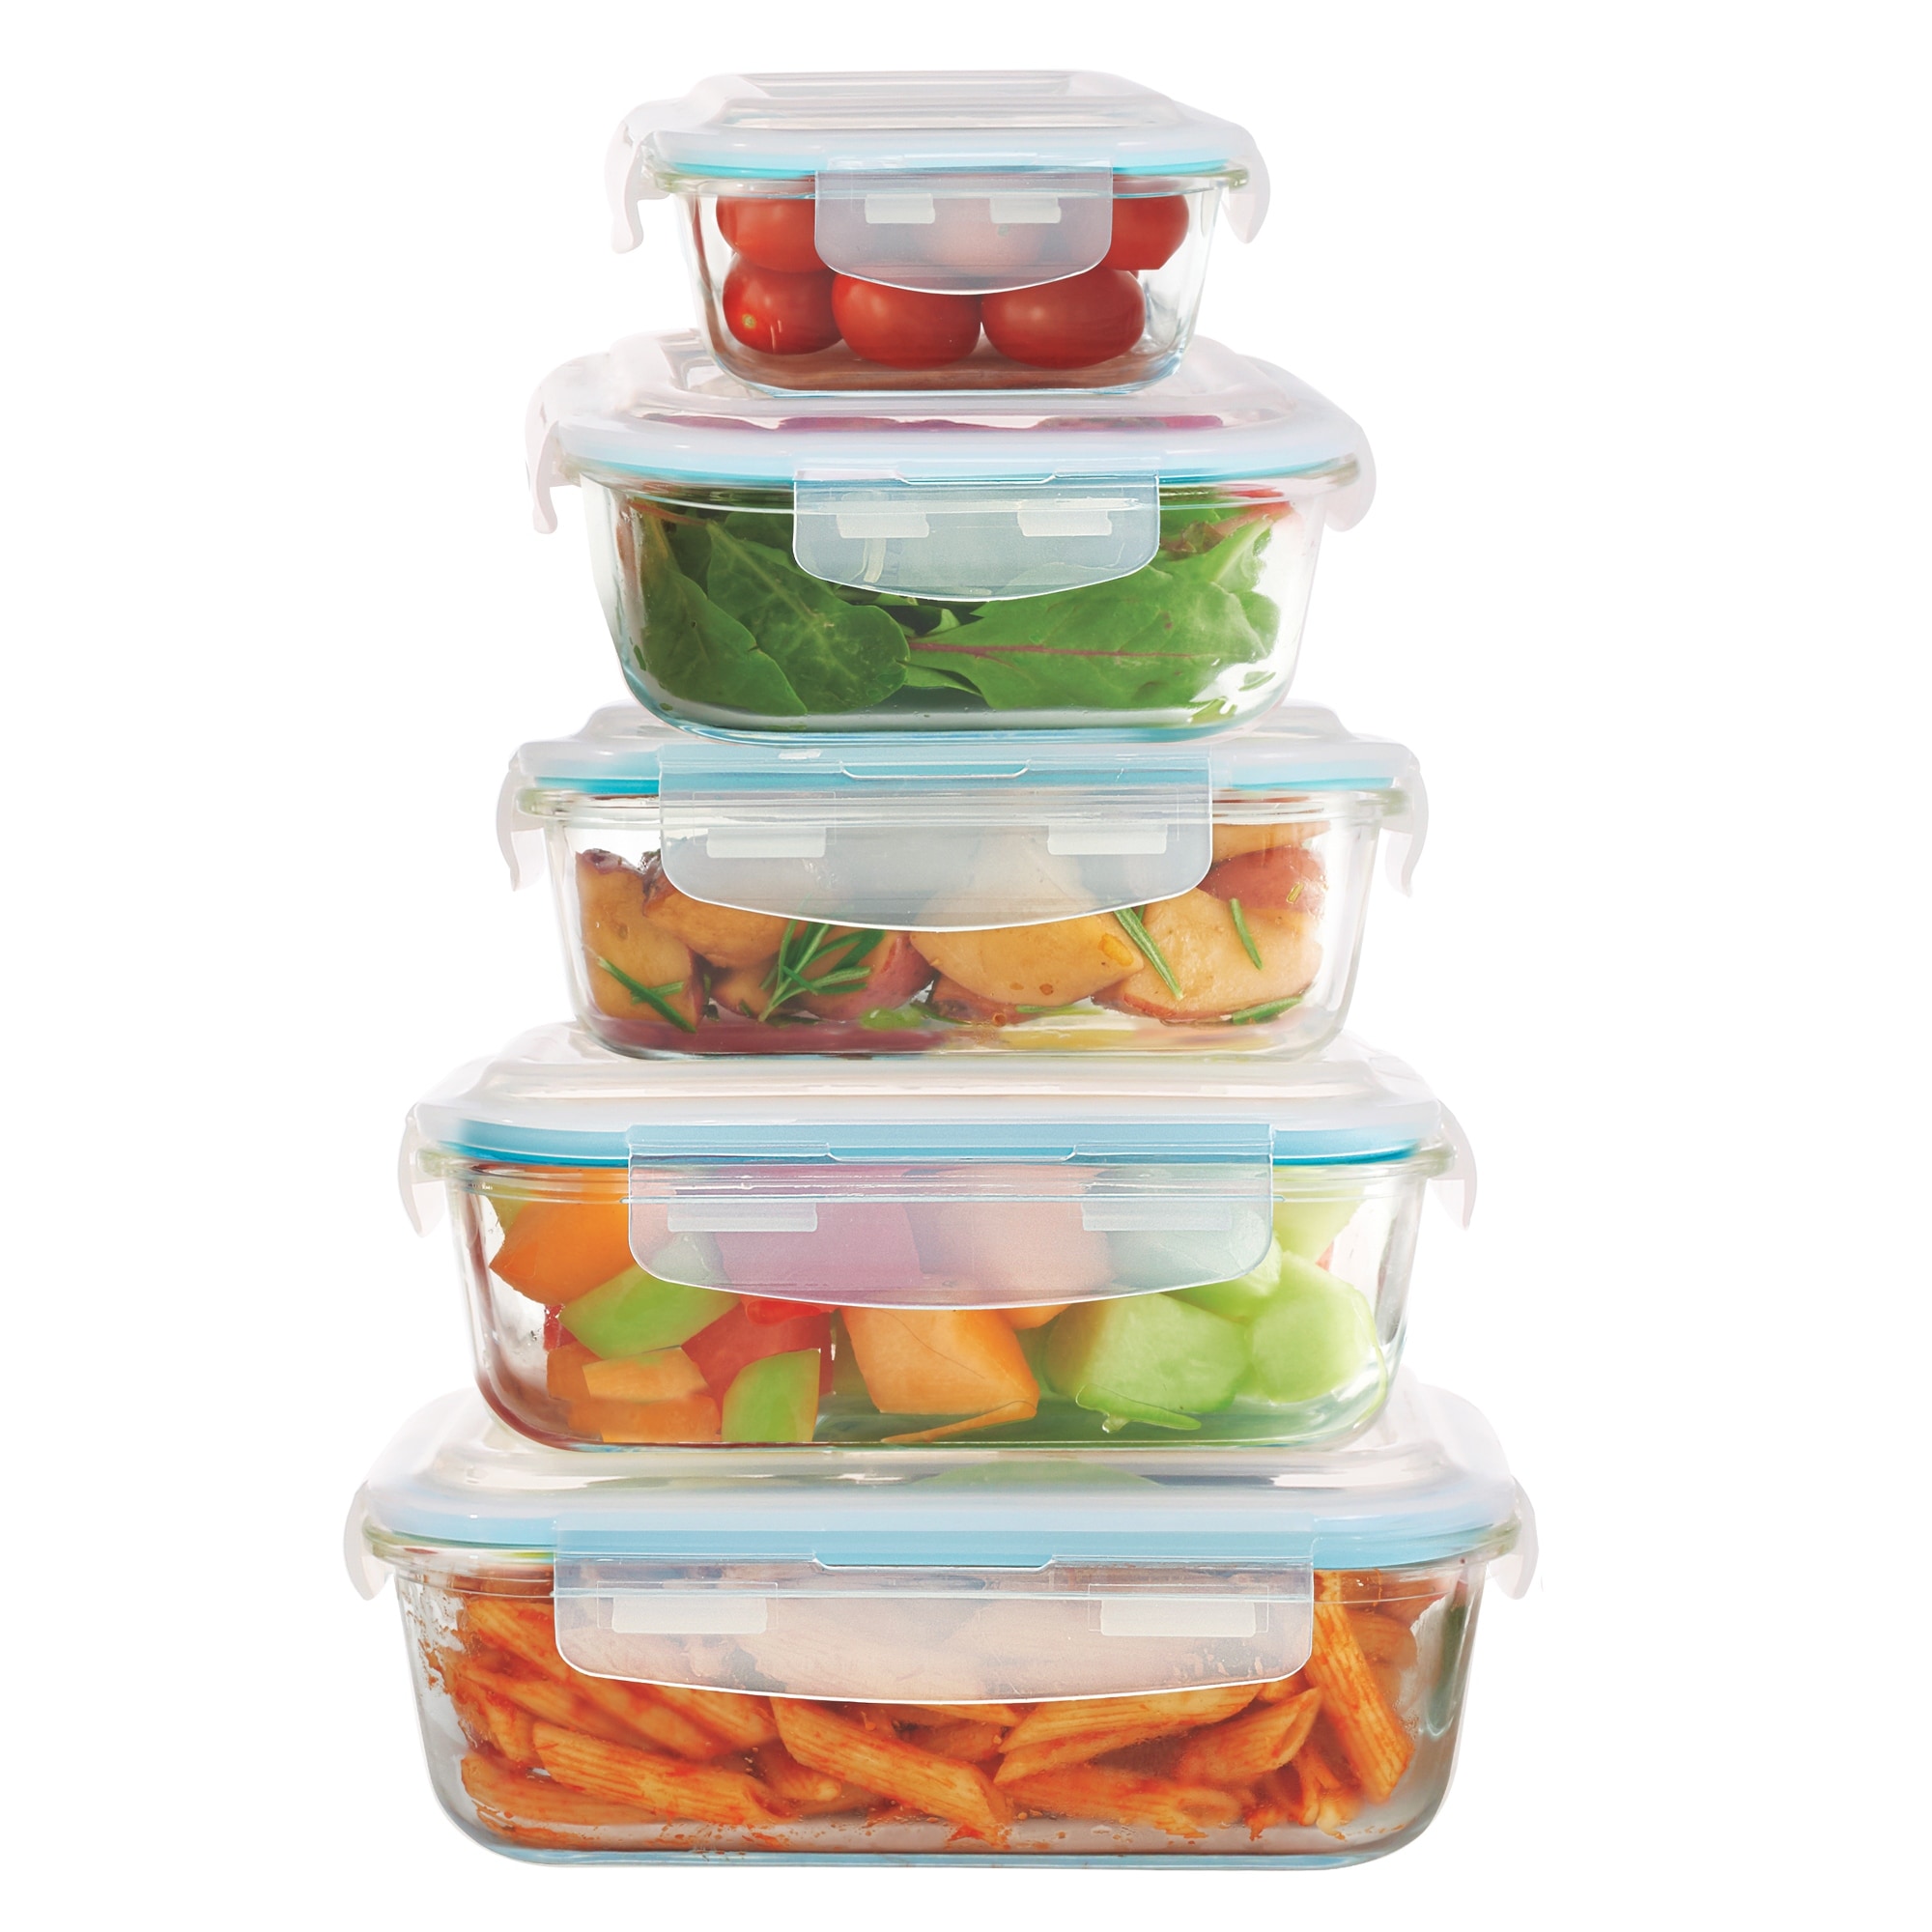 https://ak1.ostkcdn.com/images/products/is/images/direct/c078298b3c238e45656336a40b8047609822e8c1/Bene-Casa-10-piece-glass-food-storage-container-set%2C-air-tight-led-containers%2C-oven-safe%2C-microwave-safe.jpg